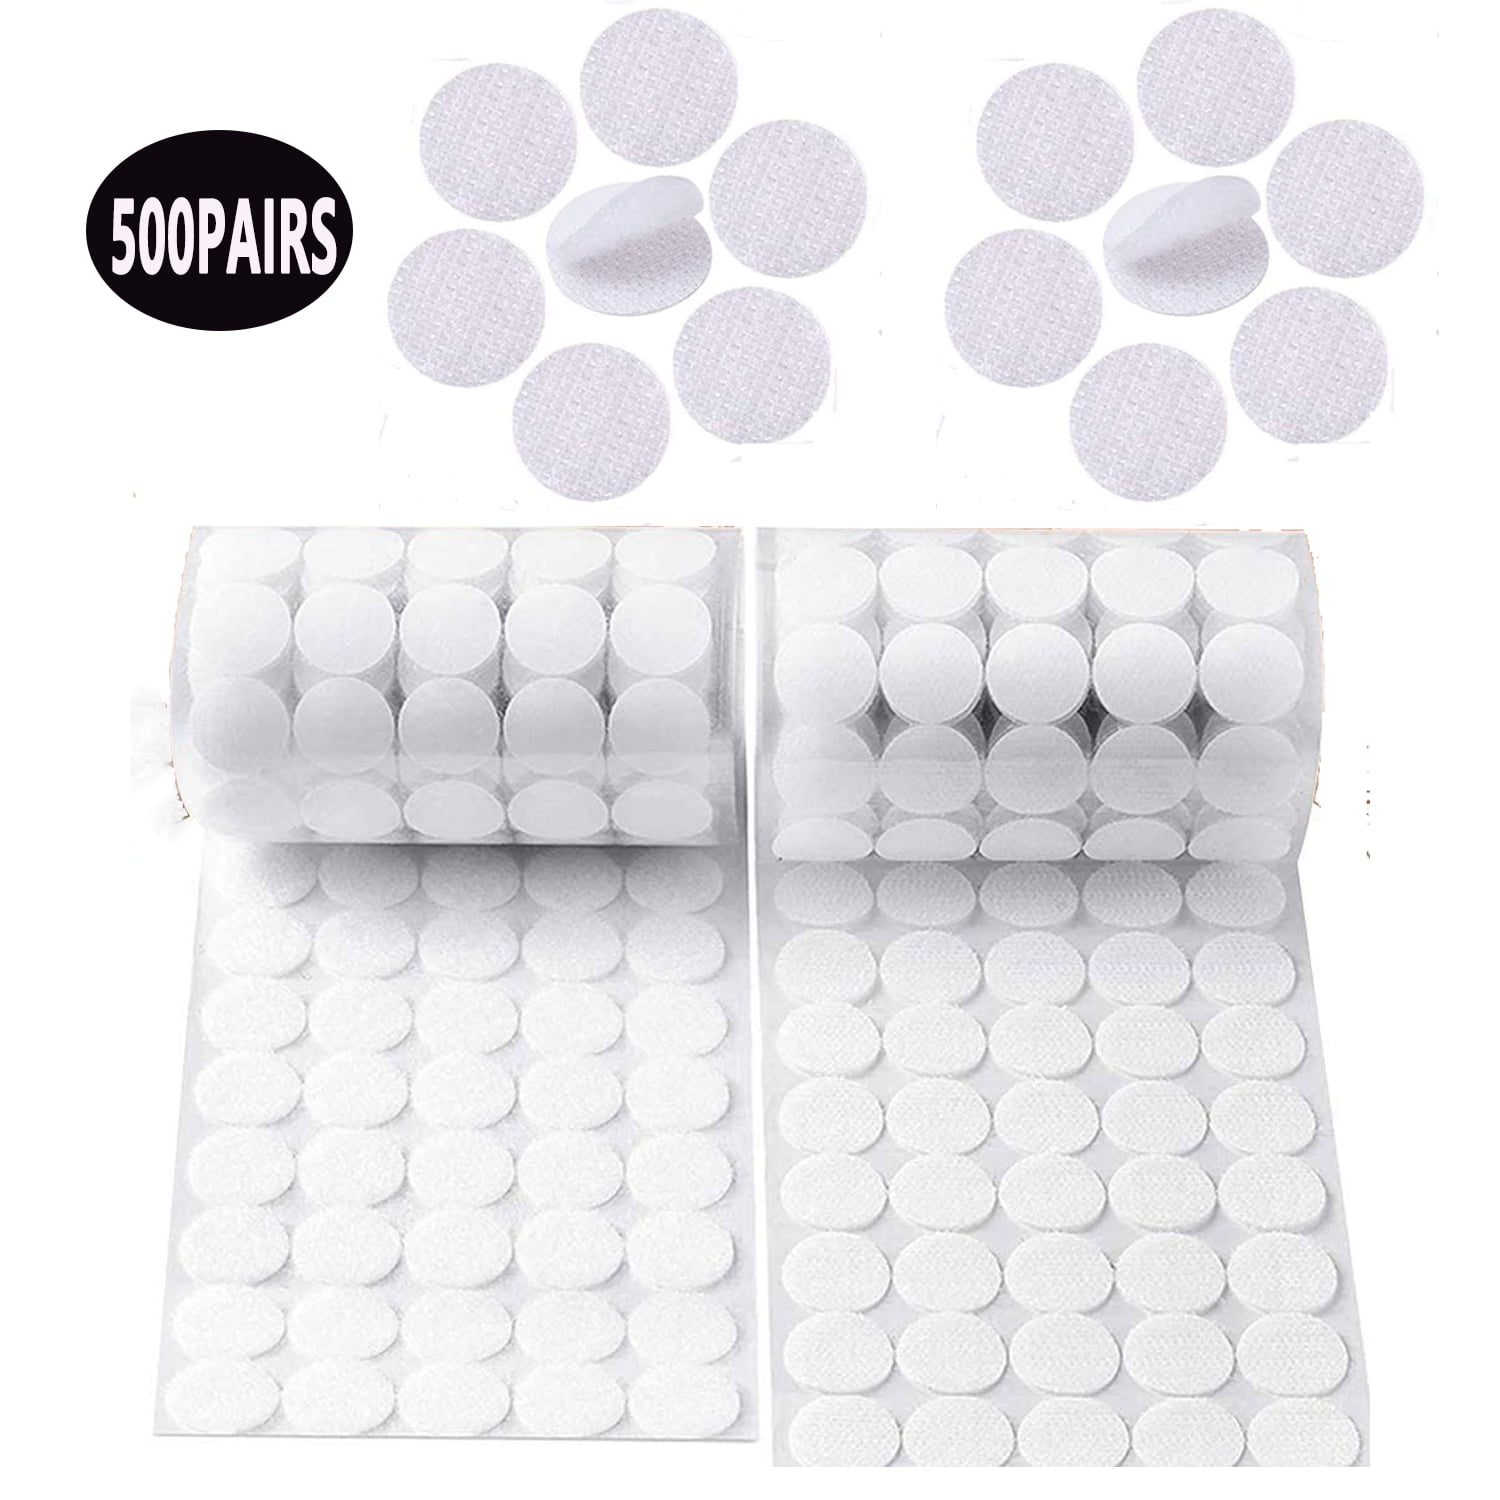 1000 Pcs 20mm Self-Adhesive Velcro Dots Glue Dots for Paper, Plastic,  Glass,Leather, Metal, Garments(White)